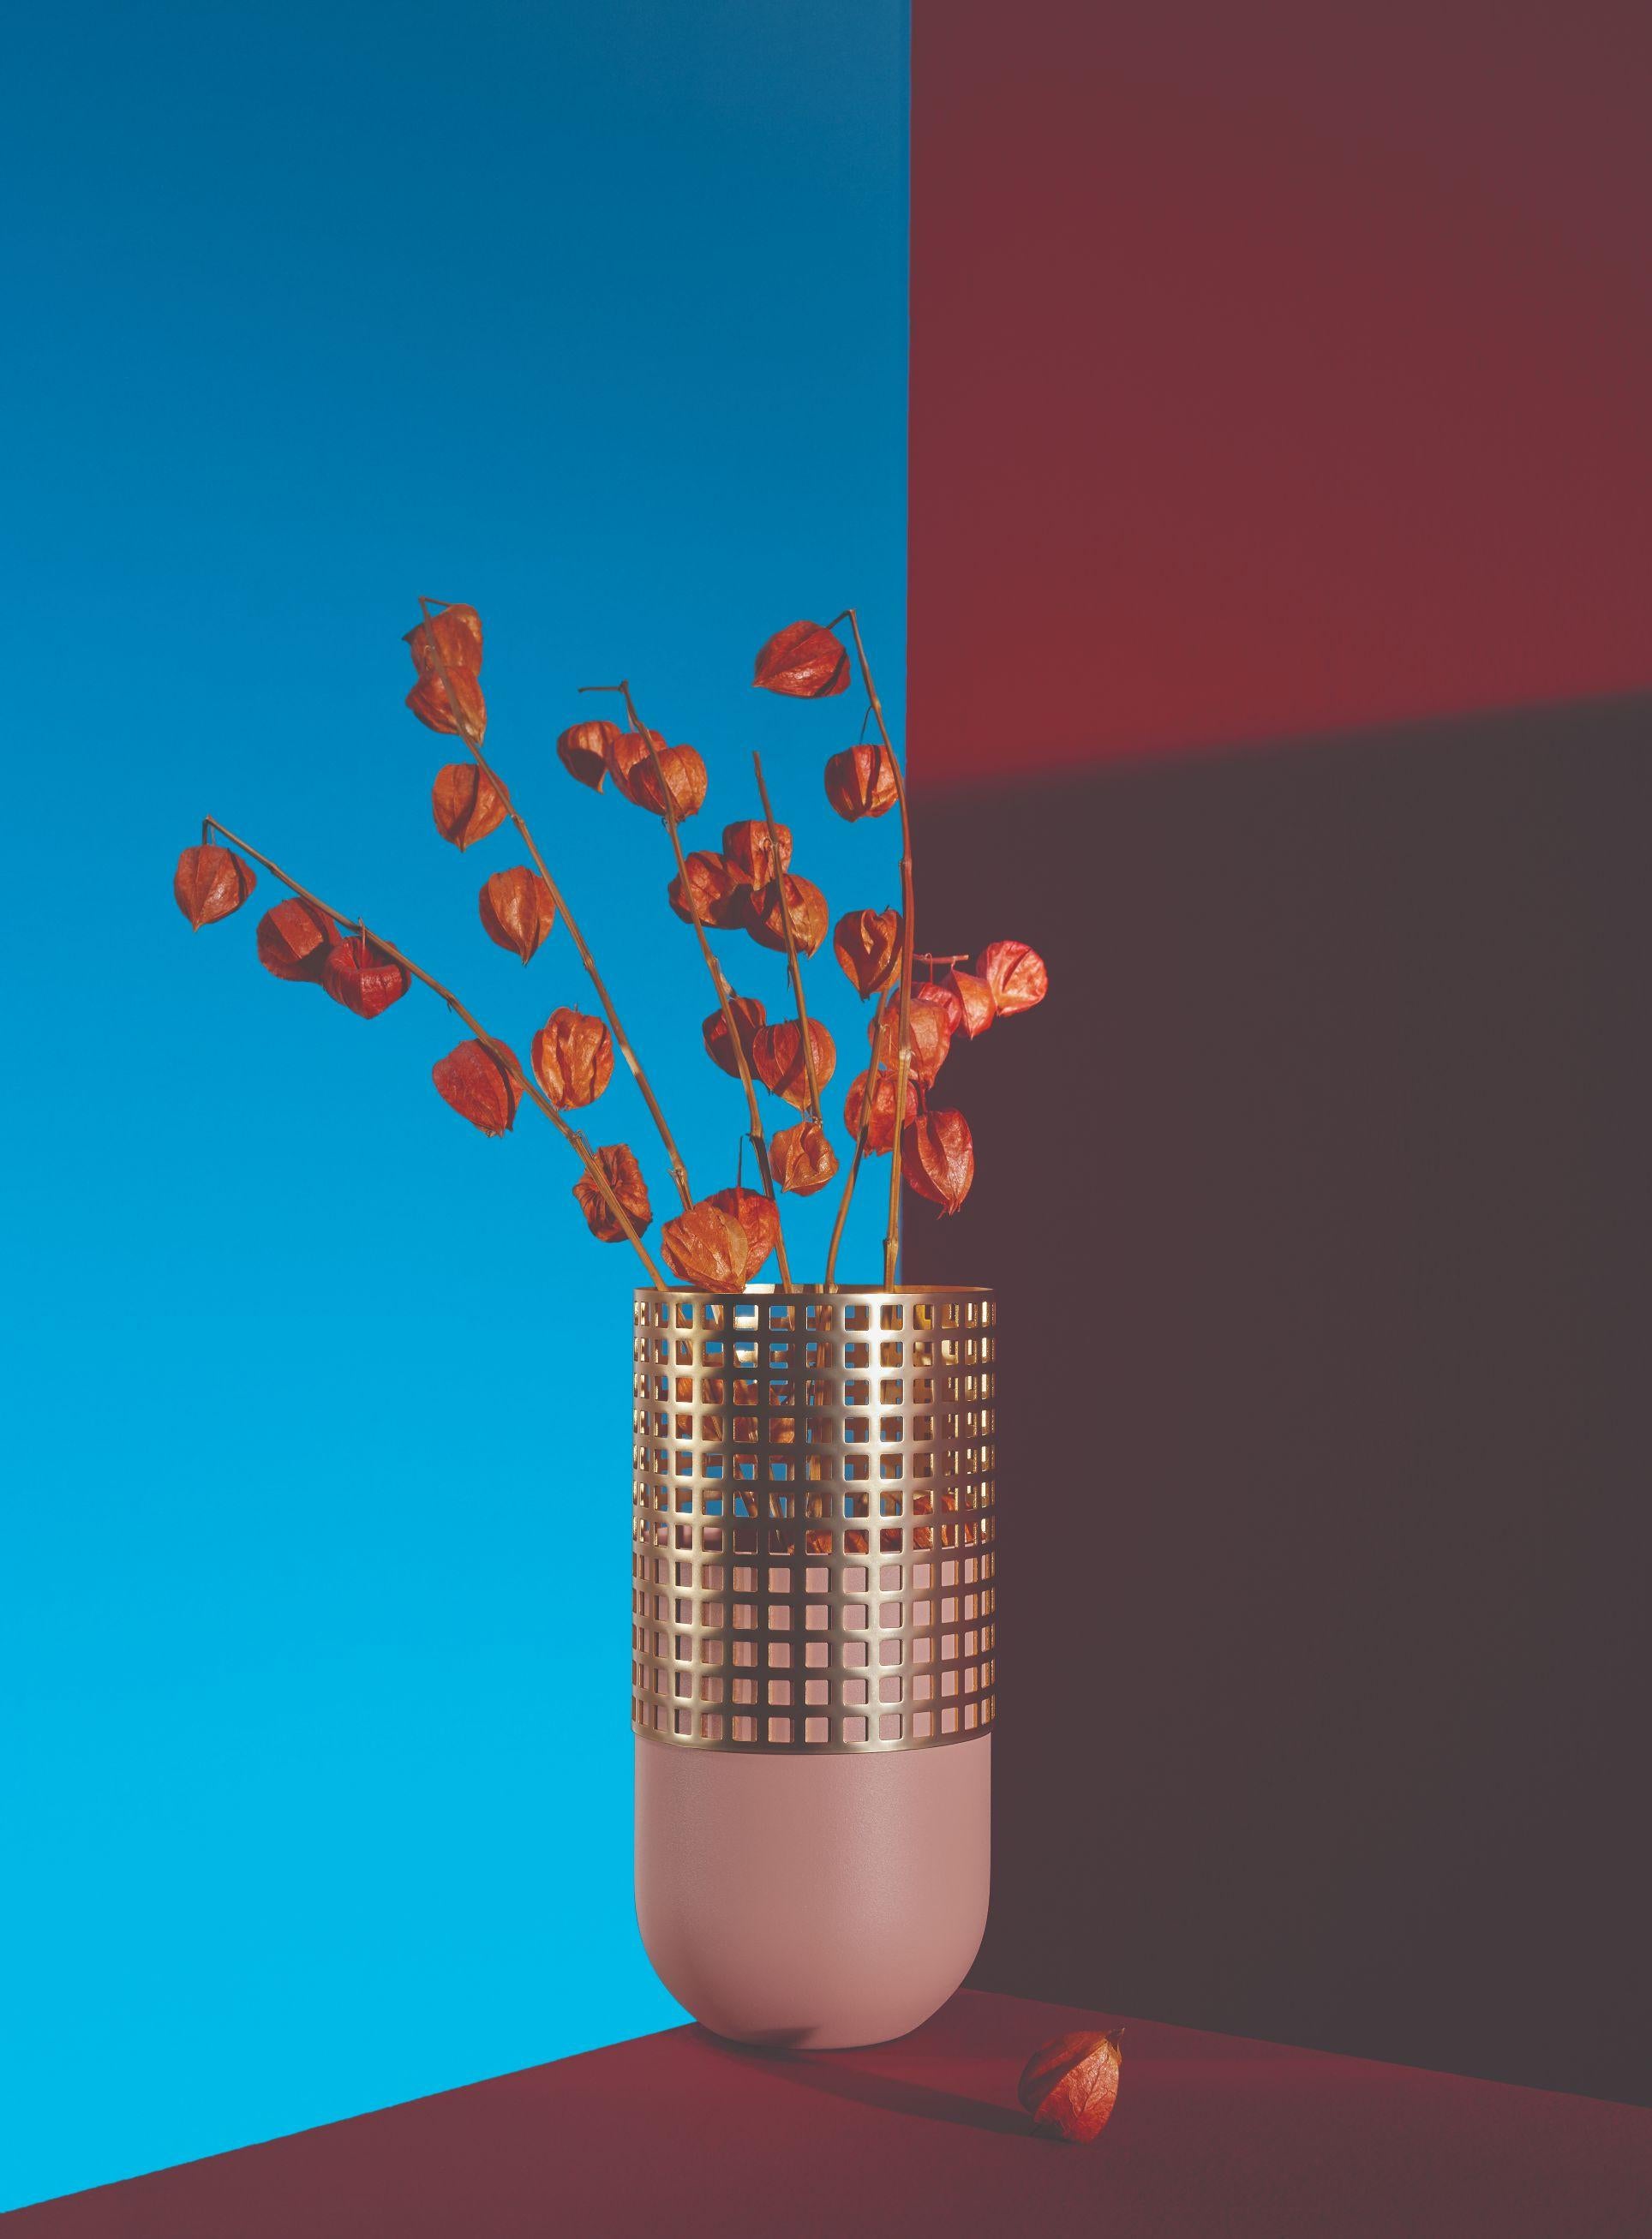 Mia tall vase by Mason Editions
Dimensions: 15 x 15 x 31 cm
Materials: Iron

The collection includes three objects with different shapes and functions.
Mia’s decisive impression is given by the contrast that is created between the soft lines of the